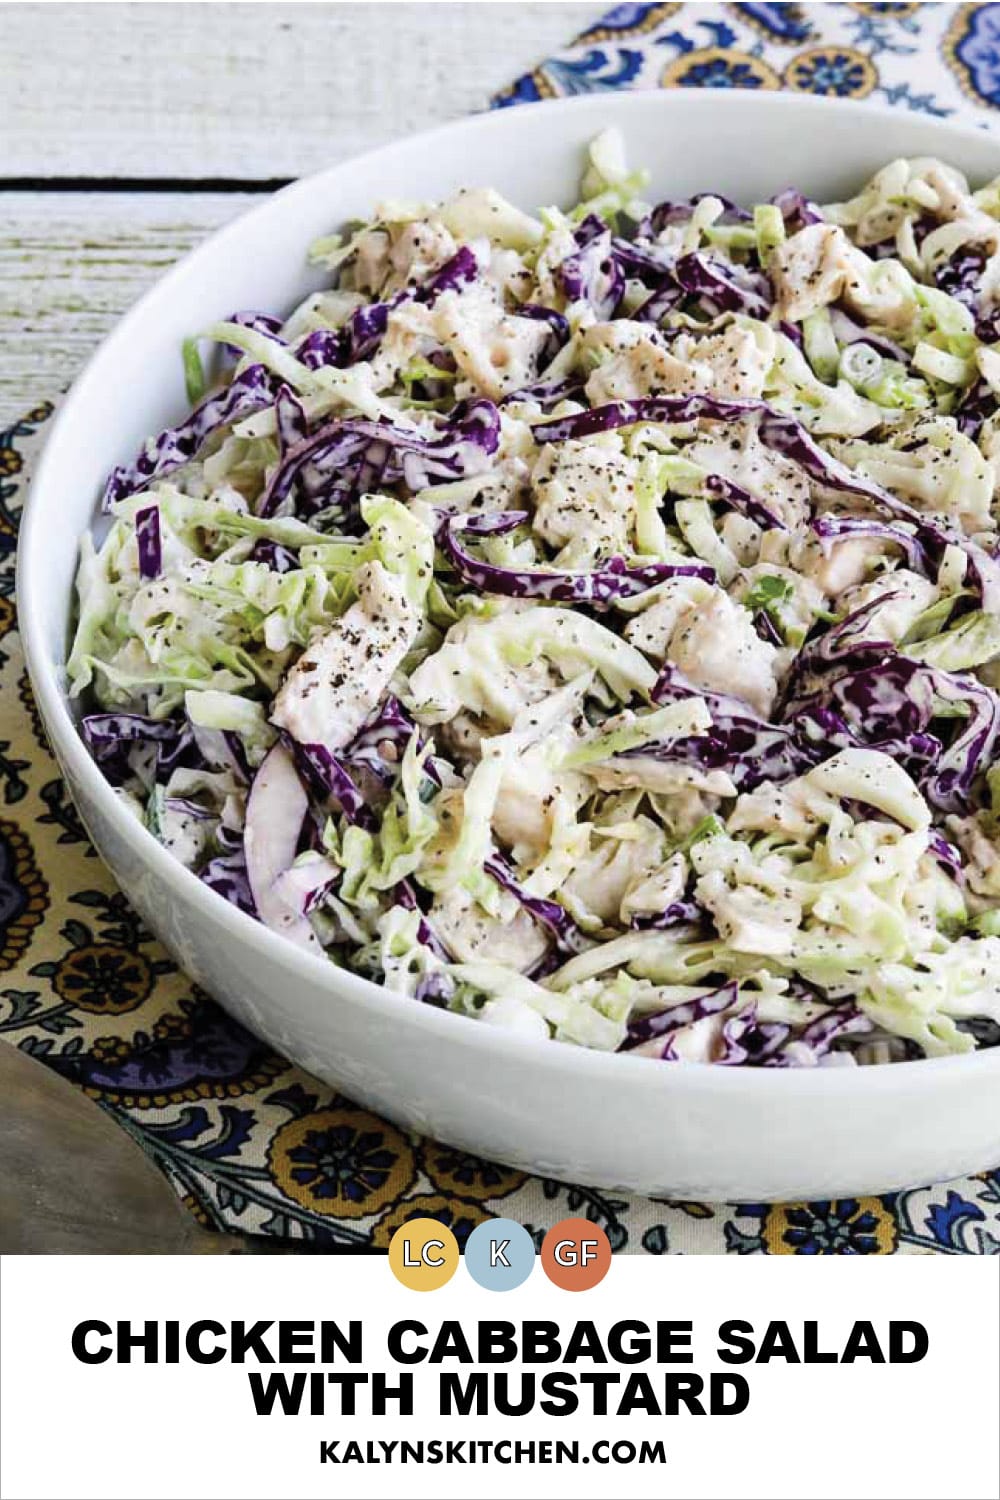 Pinterest image of Chicken Cabbage Salad with Mustard